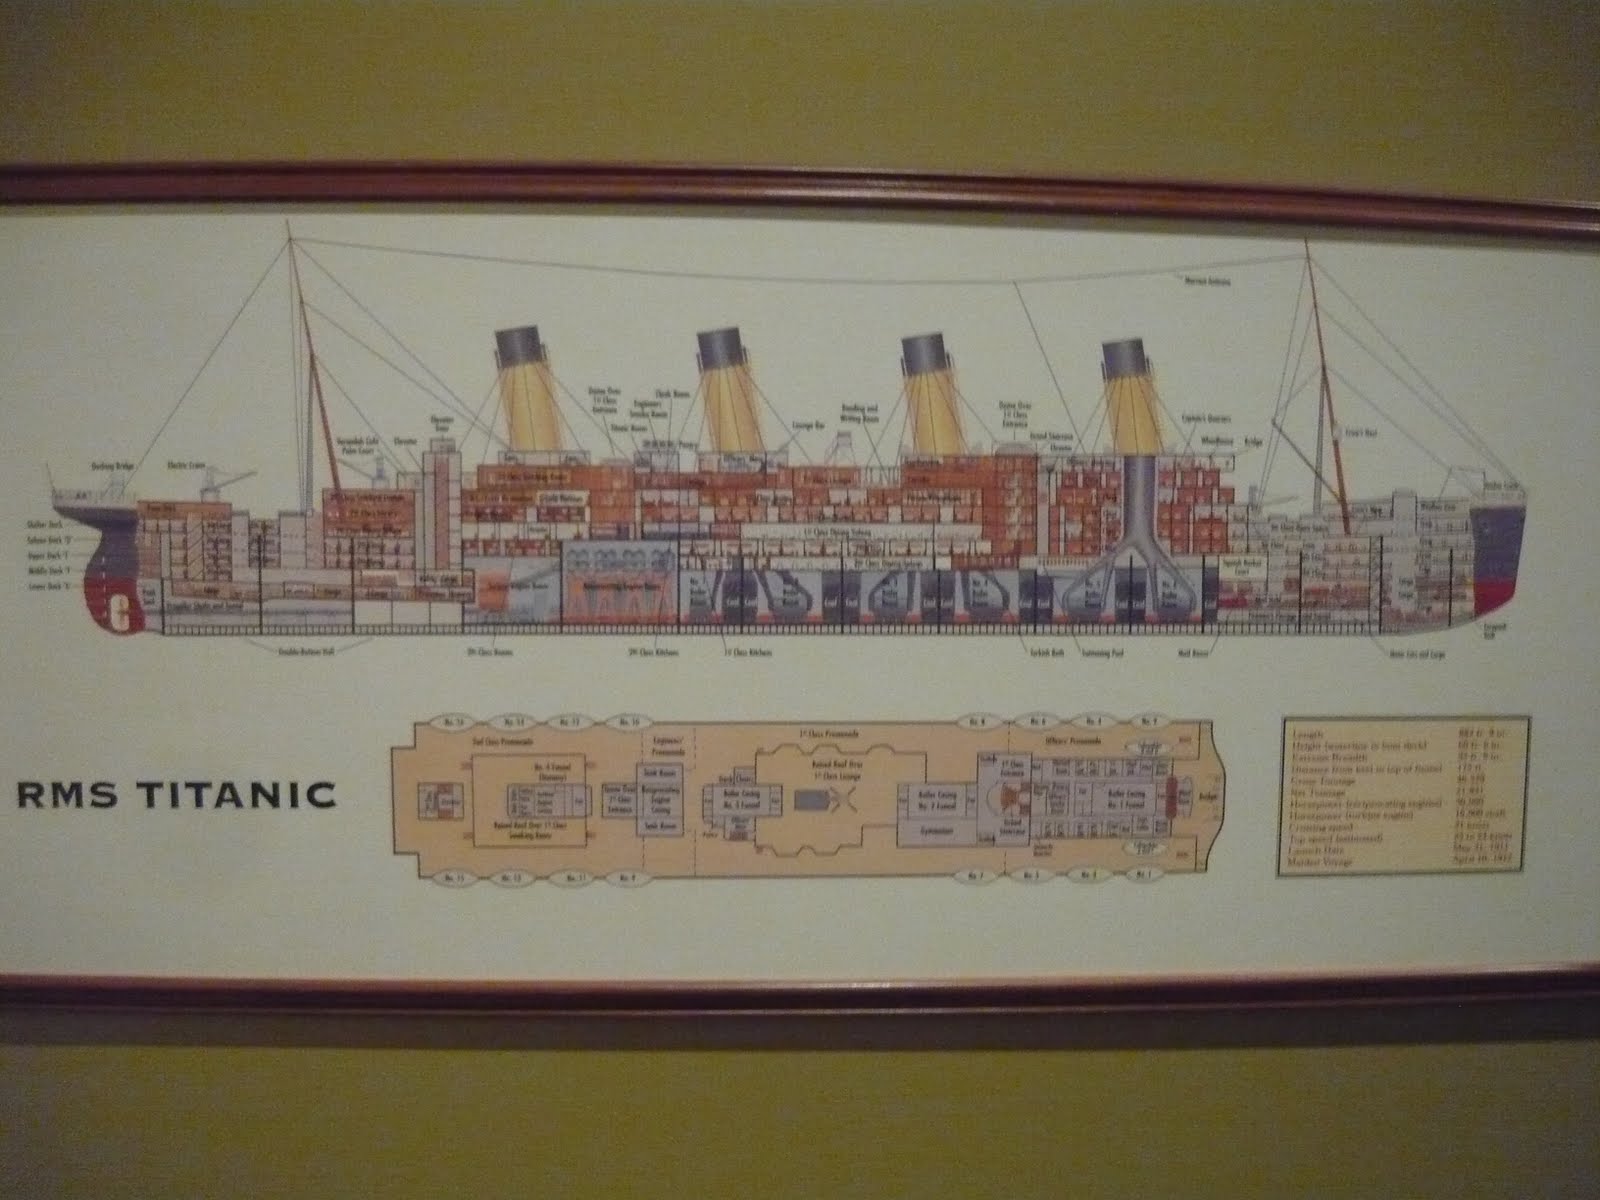 The Browns are off to America: The USA Titanic Exhibition...AWESOME